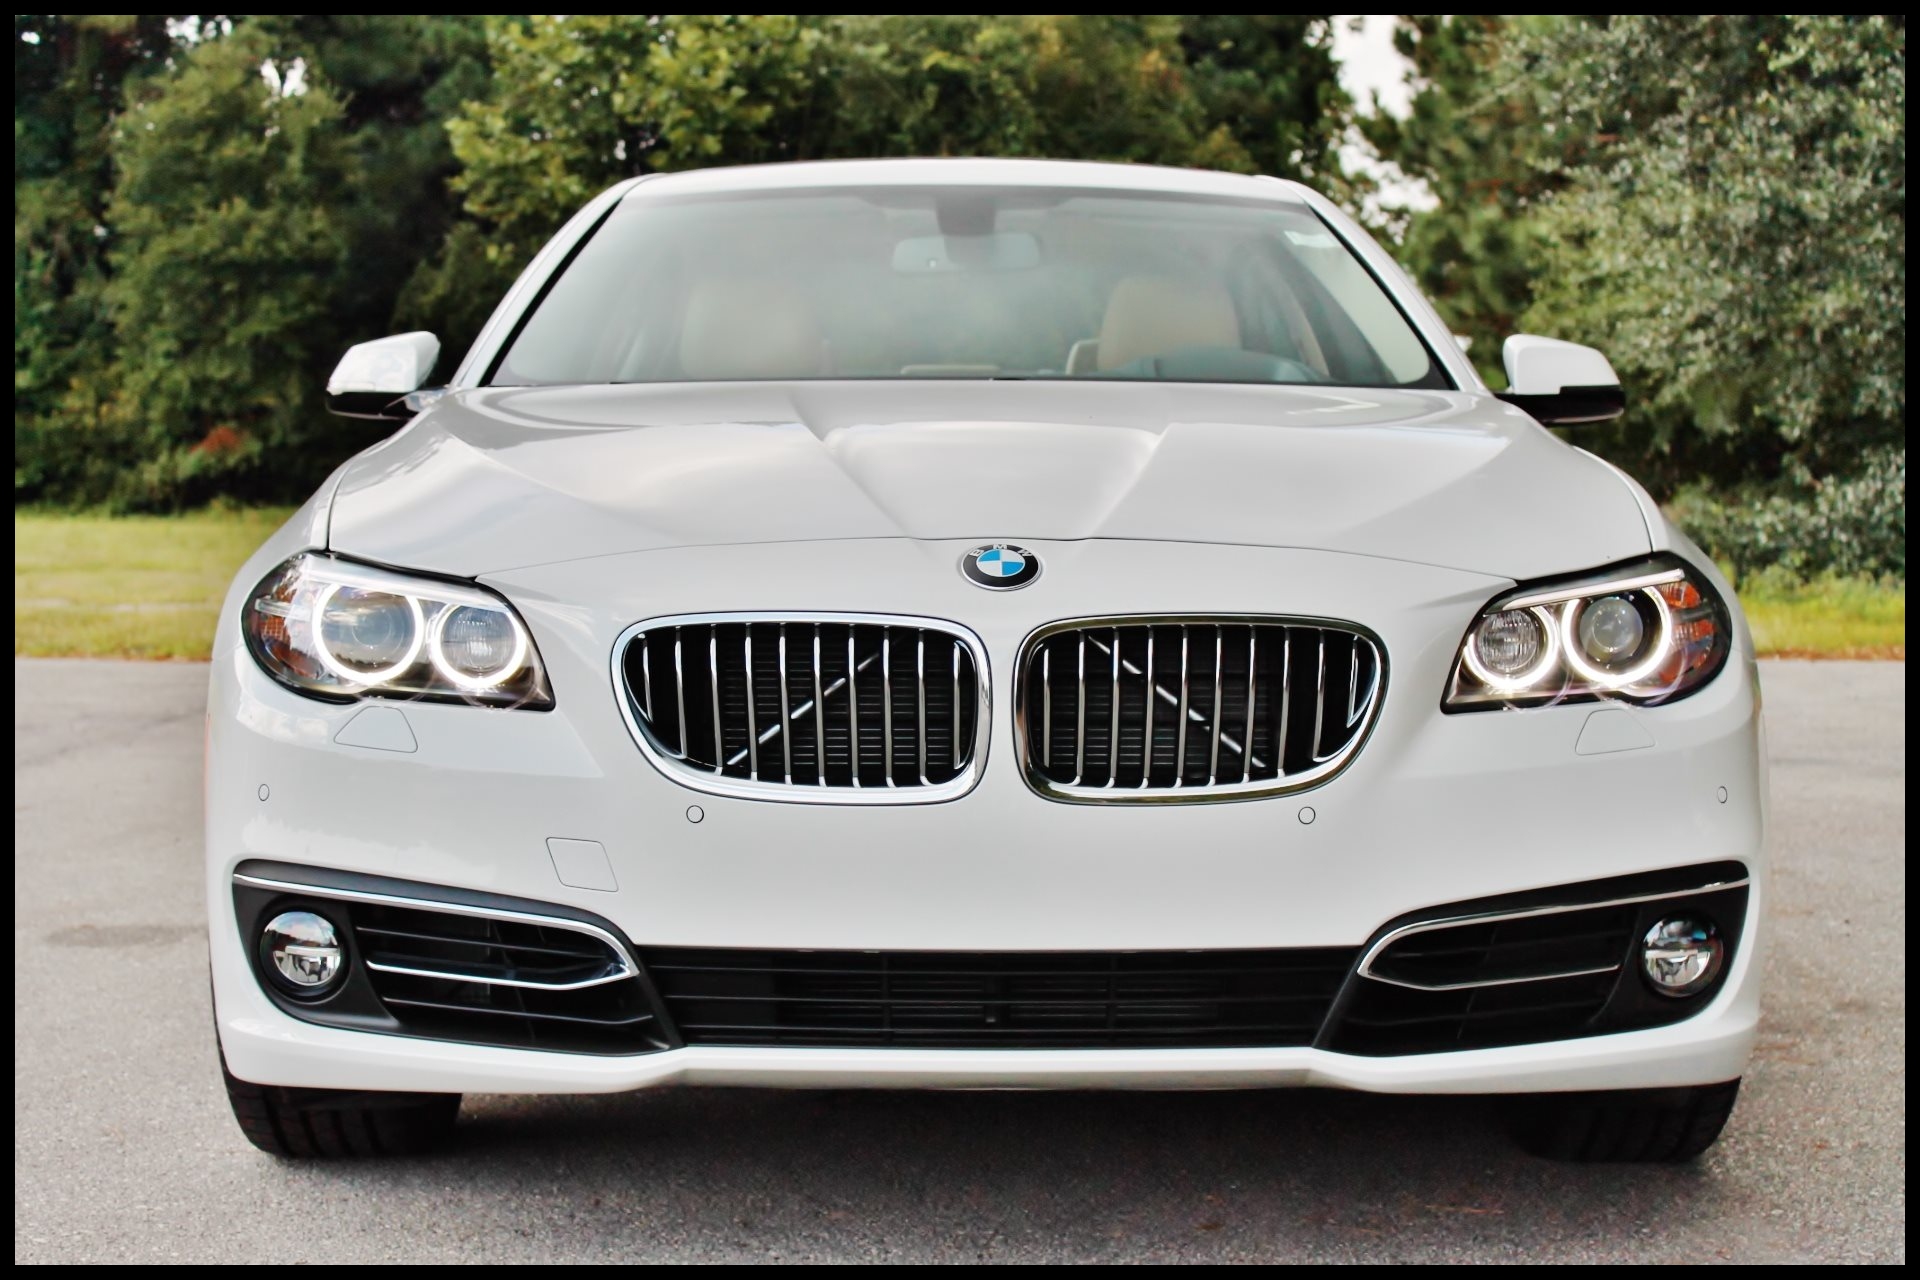 For drivers in the Fayetteville NC area looking for a high performance vehicle that provides superb craftsmanship highly intuitive technology and